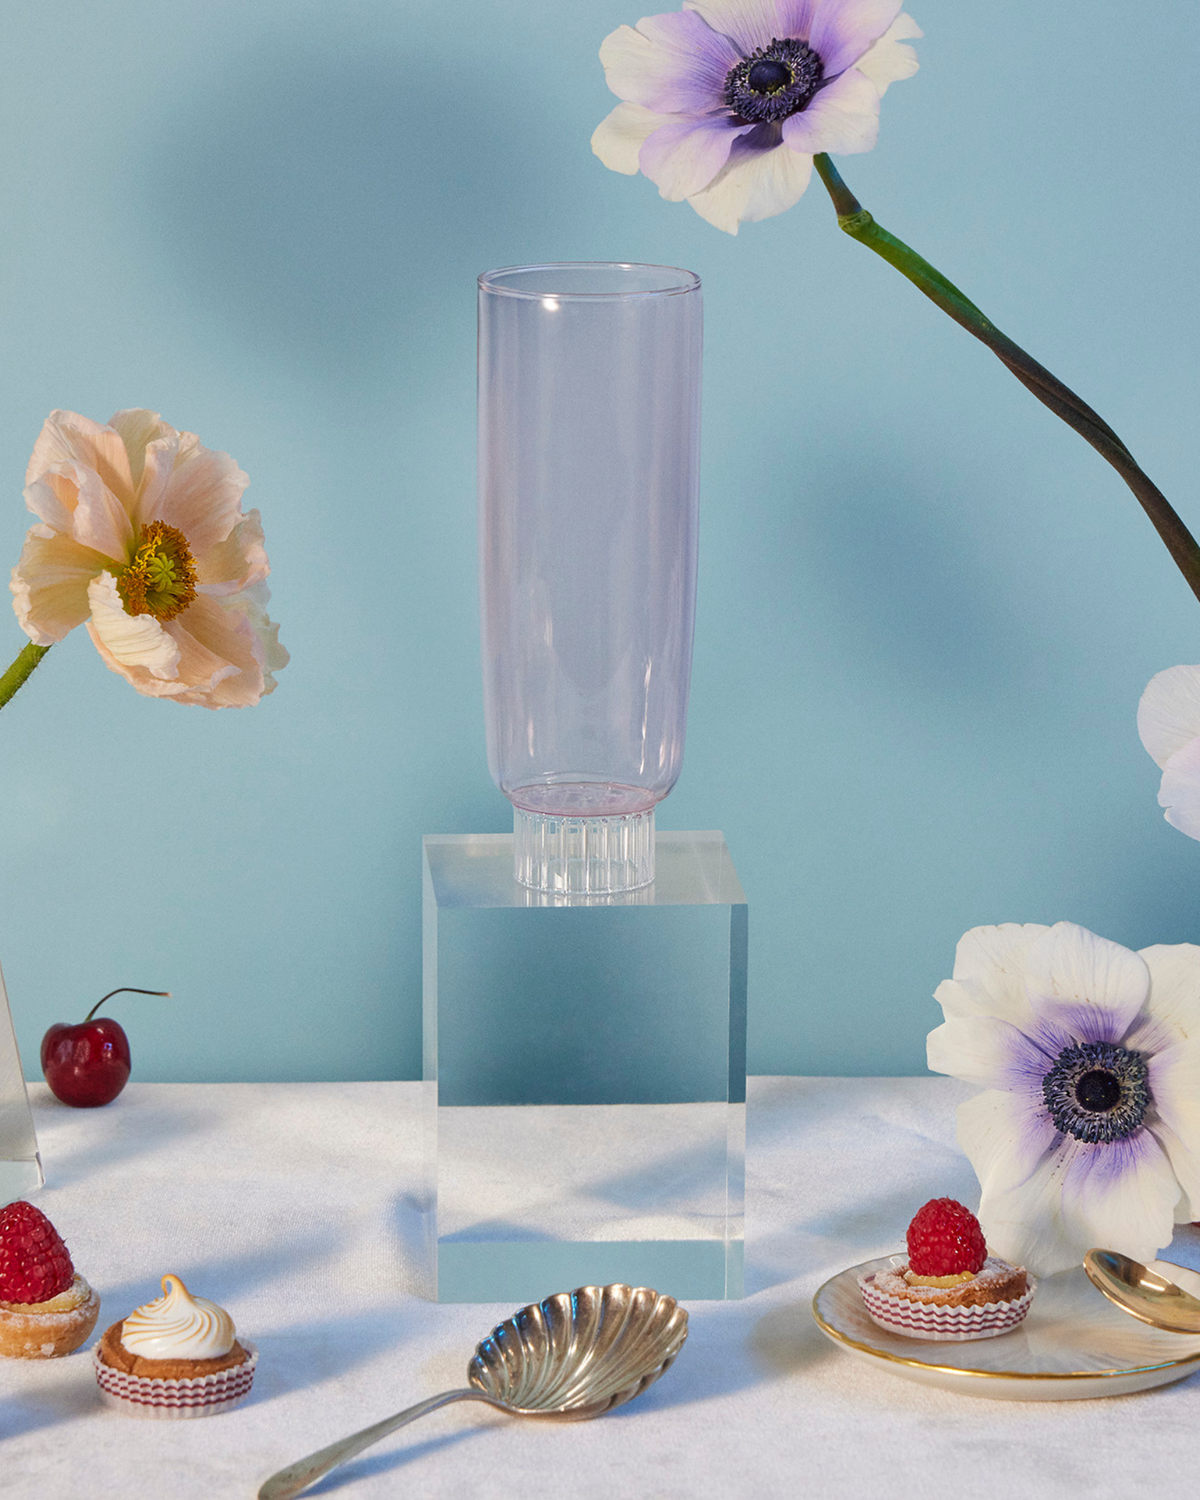 Sprezz's hand-blown colored champagne glass, crafted from dishwasher-safe, high-quality borosilicate glass, on an elegant table setting with pale pink poppies and purple-centered anemones in glass vases, fresh strawberries, cherries, and delicate pastries. These blush pink flute exudes effortless elegance, its perfect for girl dinners and makes the most thoughtful gifts for friends and family.